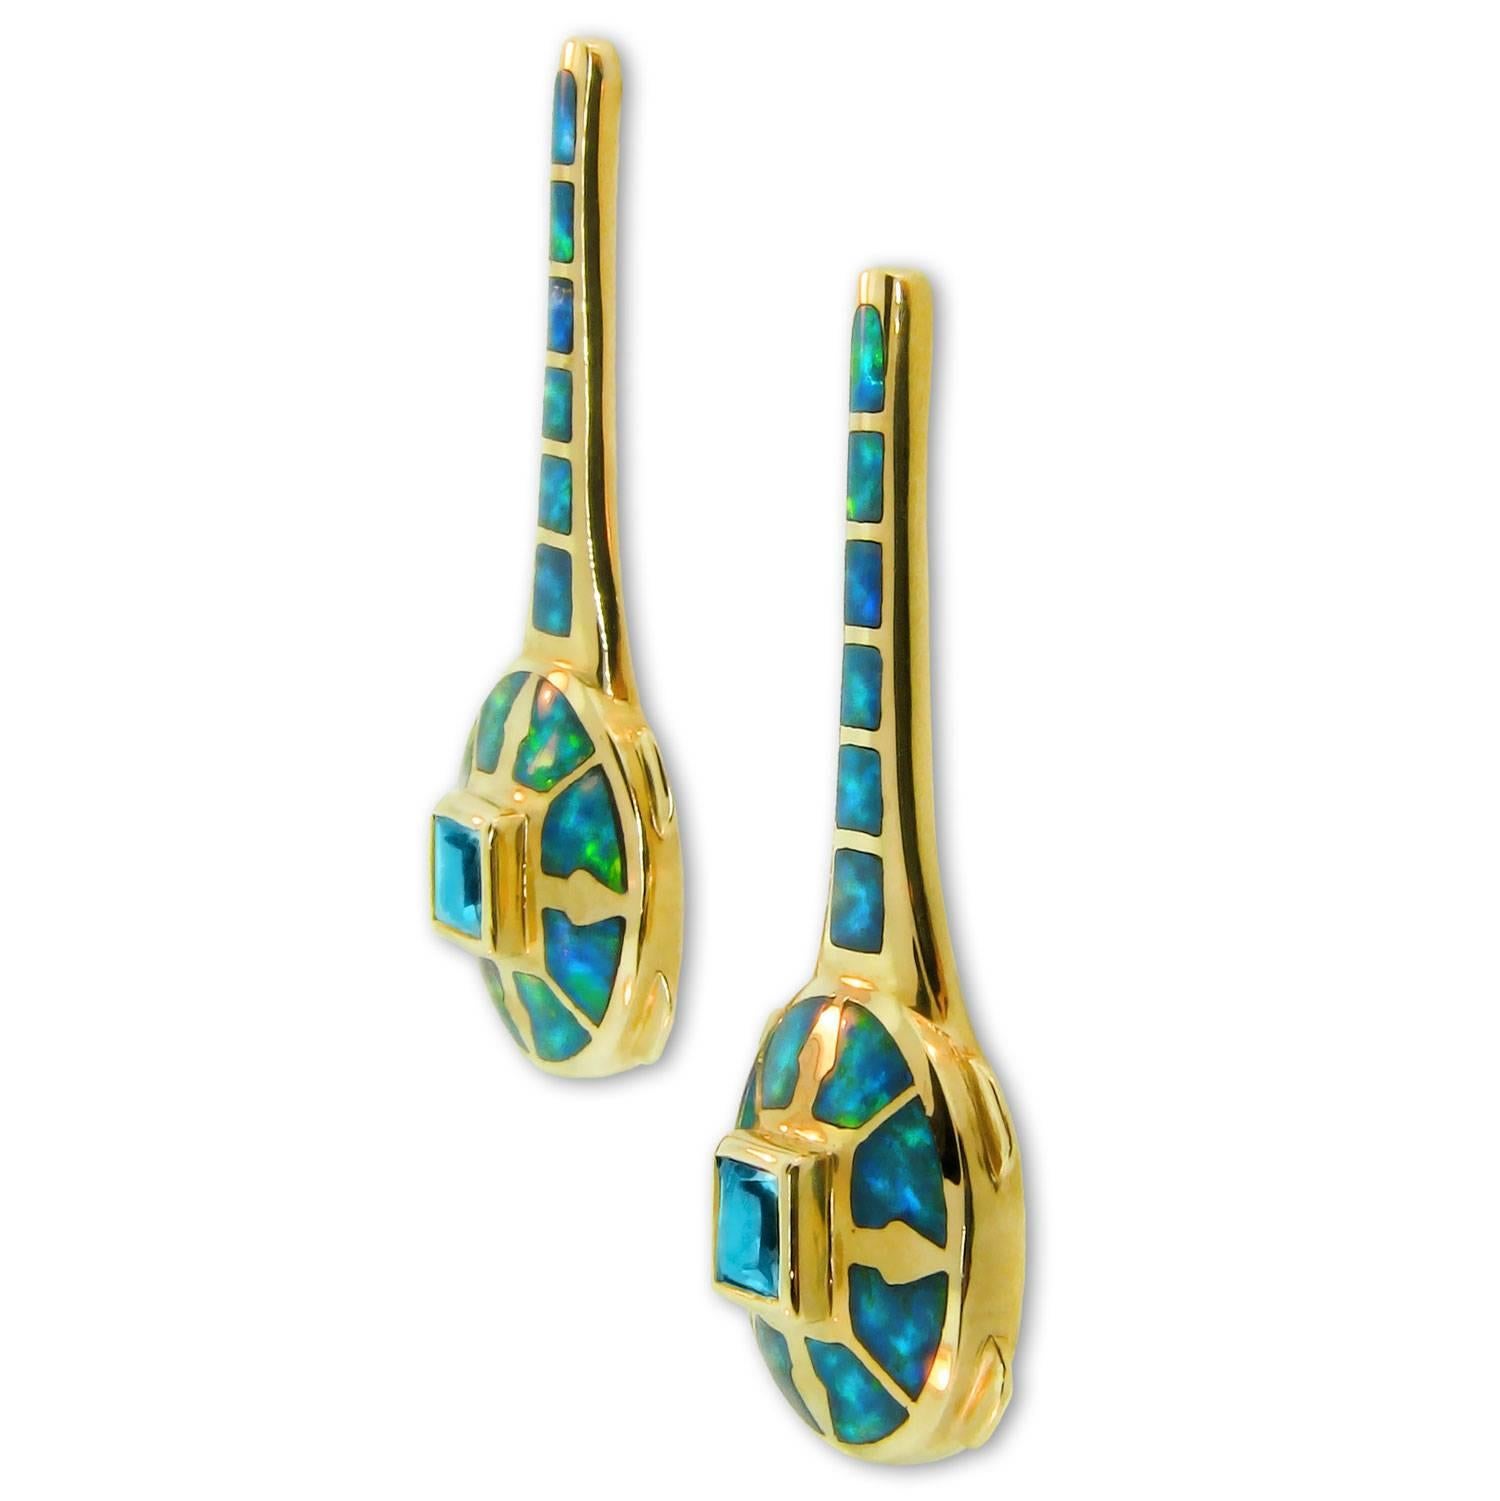 A New Spin On Opal. Award-winning jewelry designer Jonathan Duran has created these unique earrings to represent the 5th element of the Universe, Ether; the Spirit that exists beyond matter.

These earrings feature gorgeous square-cut blue topaz